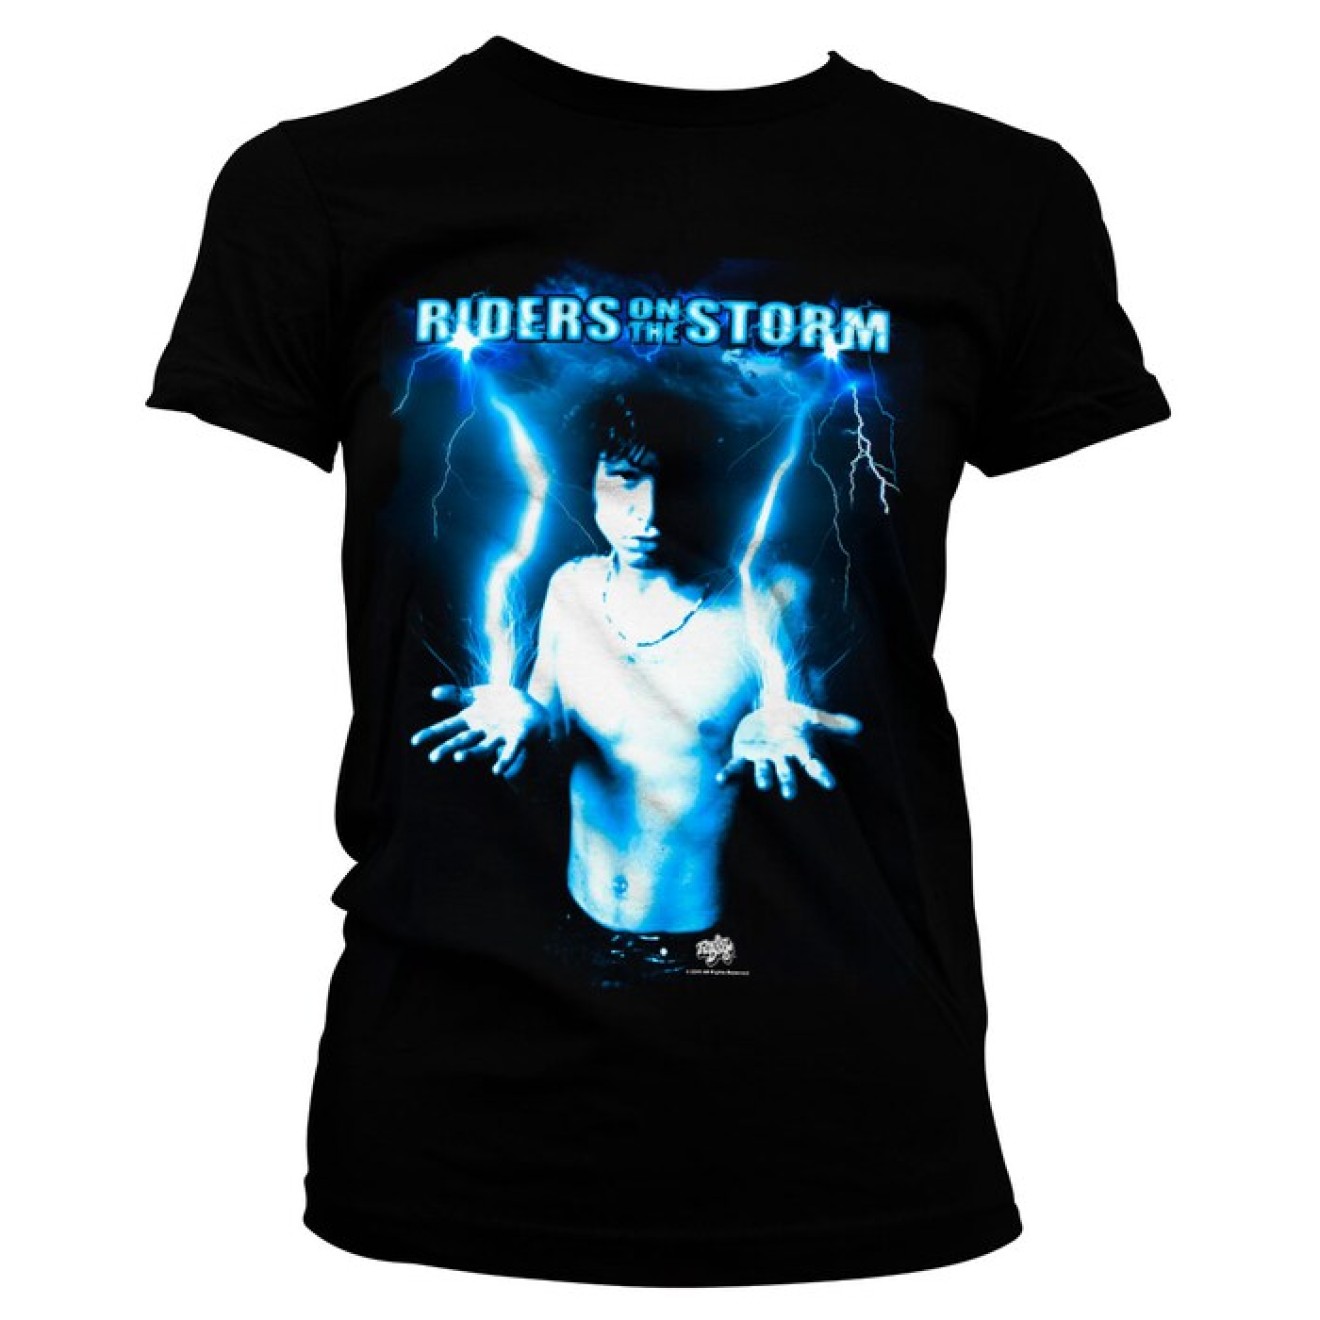 Riders On The Storm - Jim Morrison Girly Tee T-Shirt